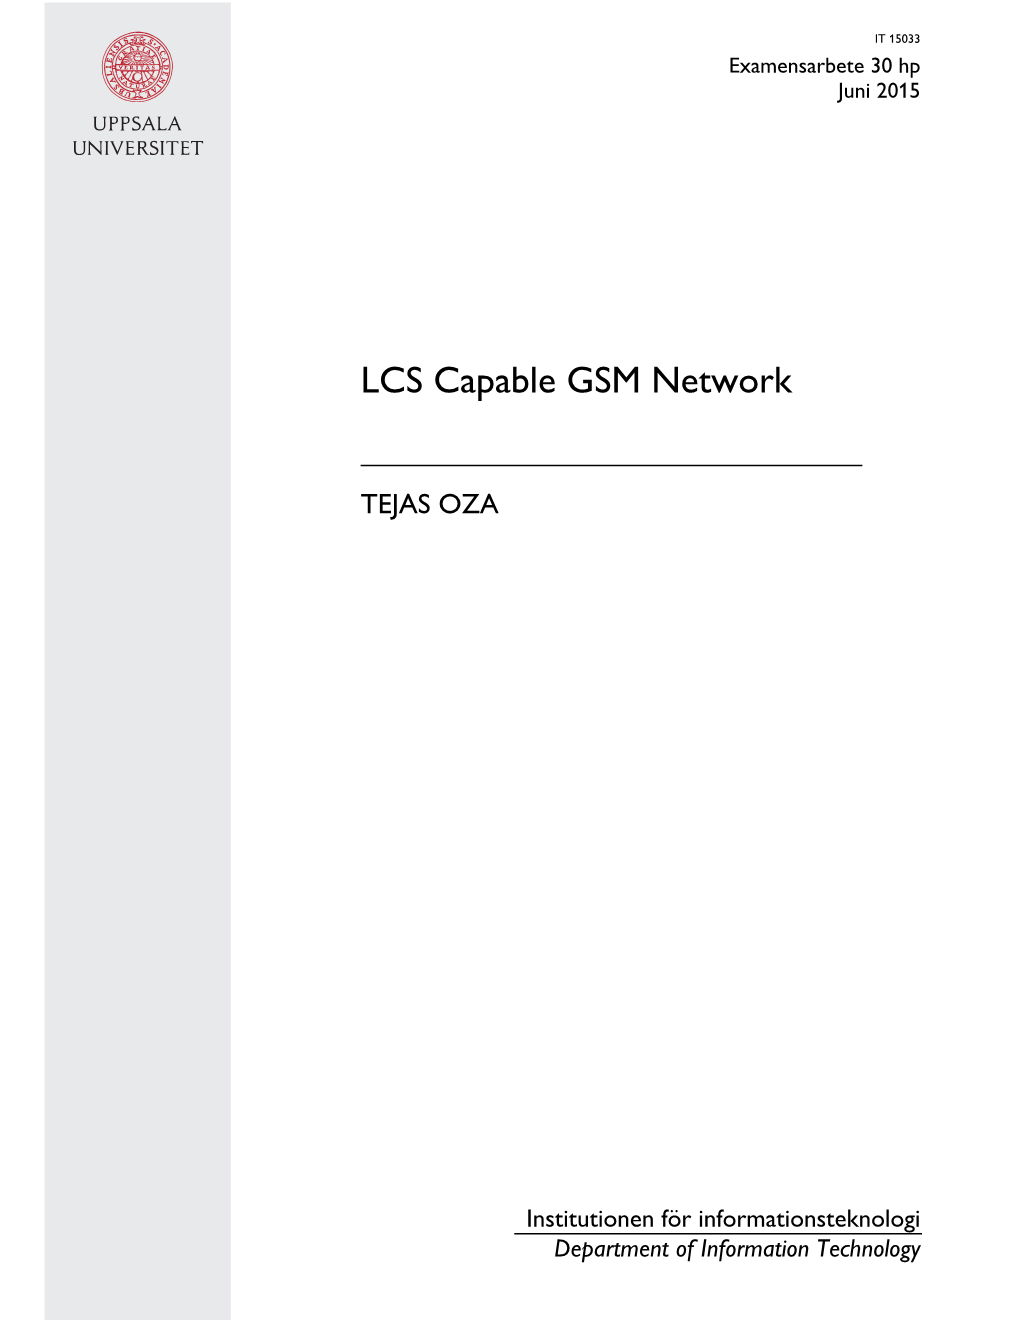 LCS Capable GSM Network